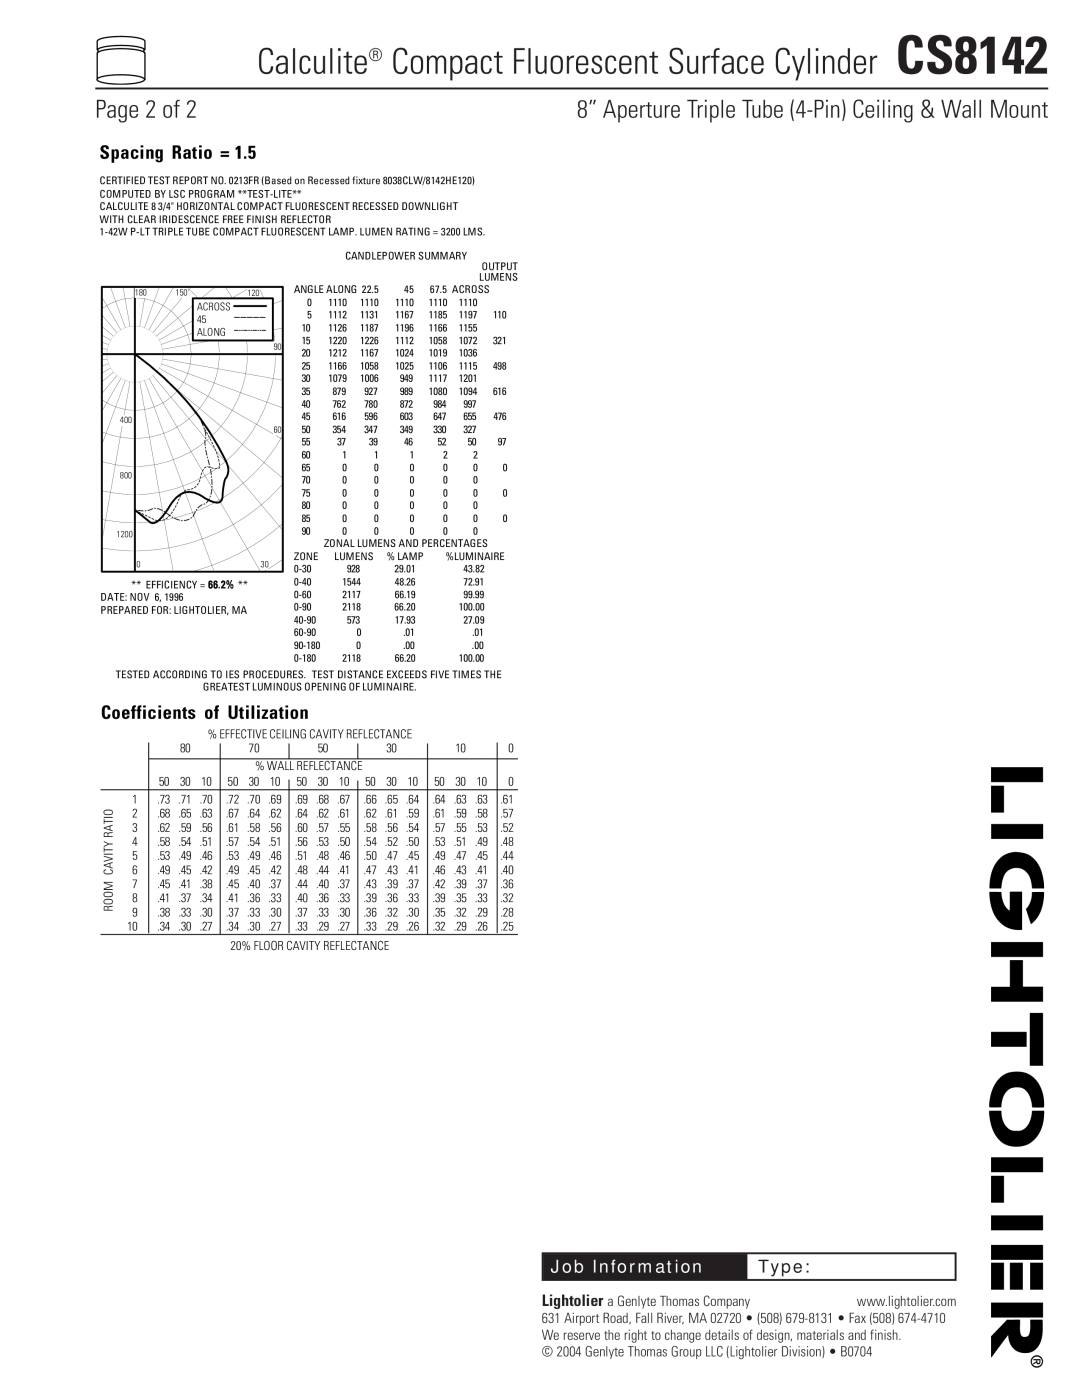 Lightolier CS8142 Page 2 of, 8” Aperture Triple Tube 4-PinCeiling & Wall Mount, Spacing Ratio =, Job Information, Type 